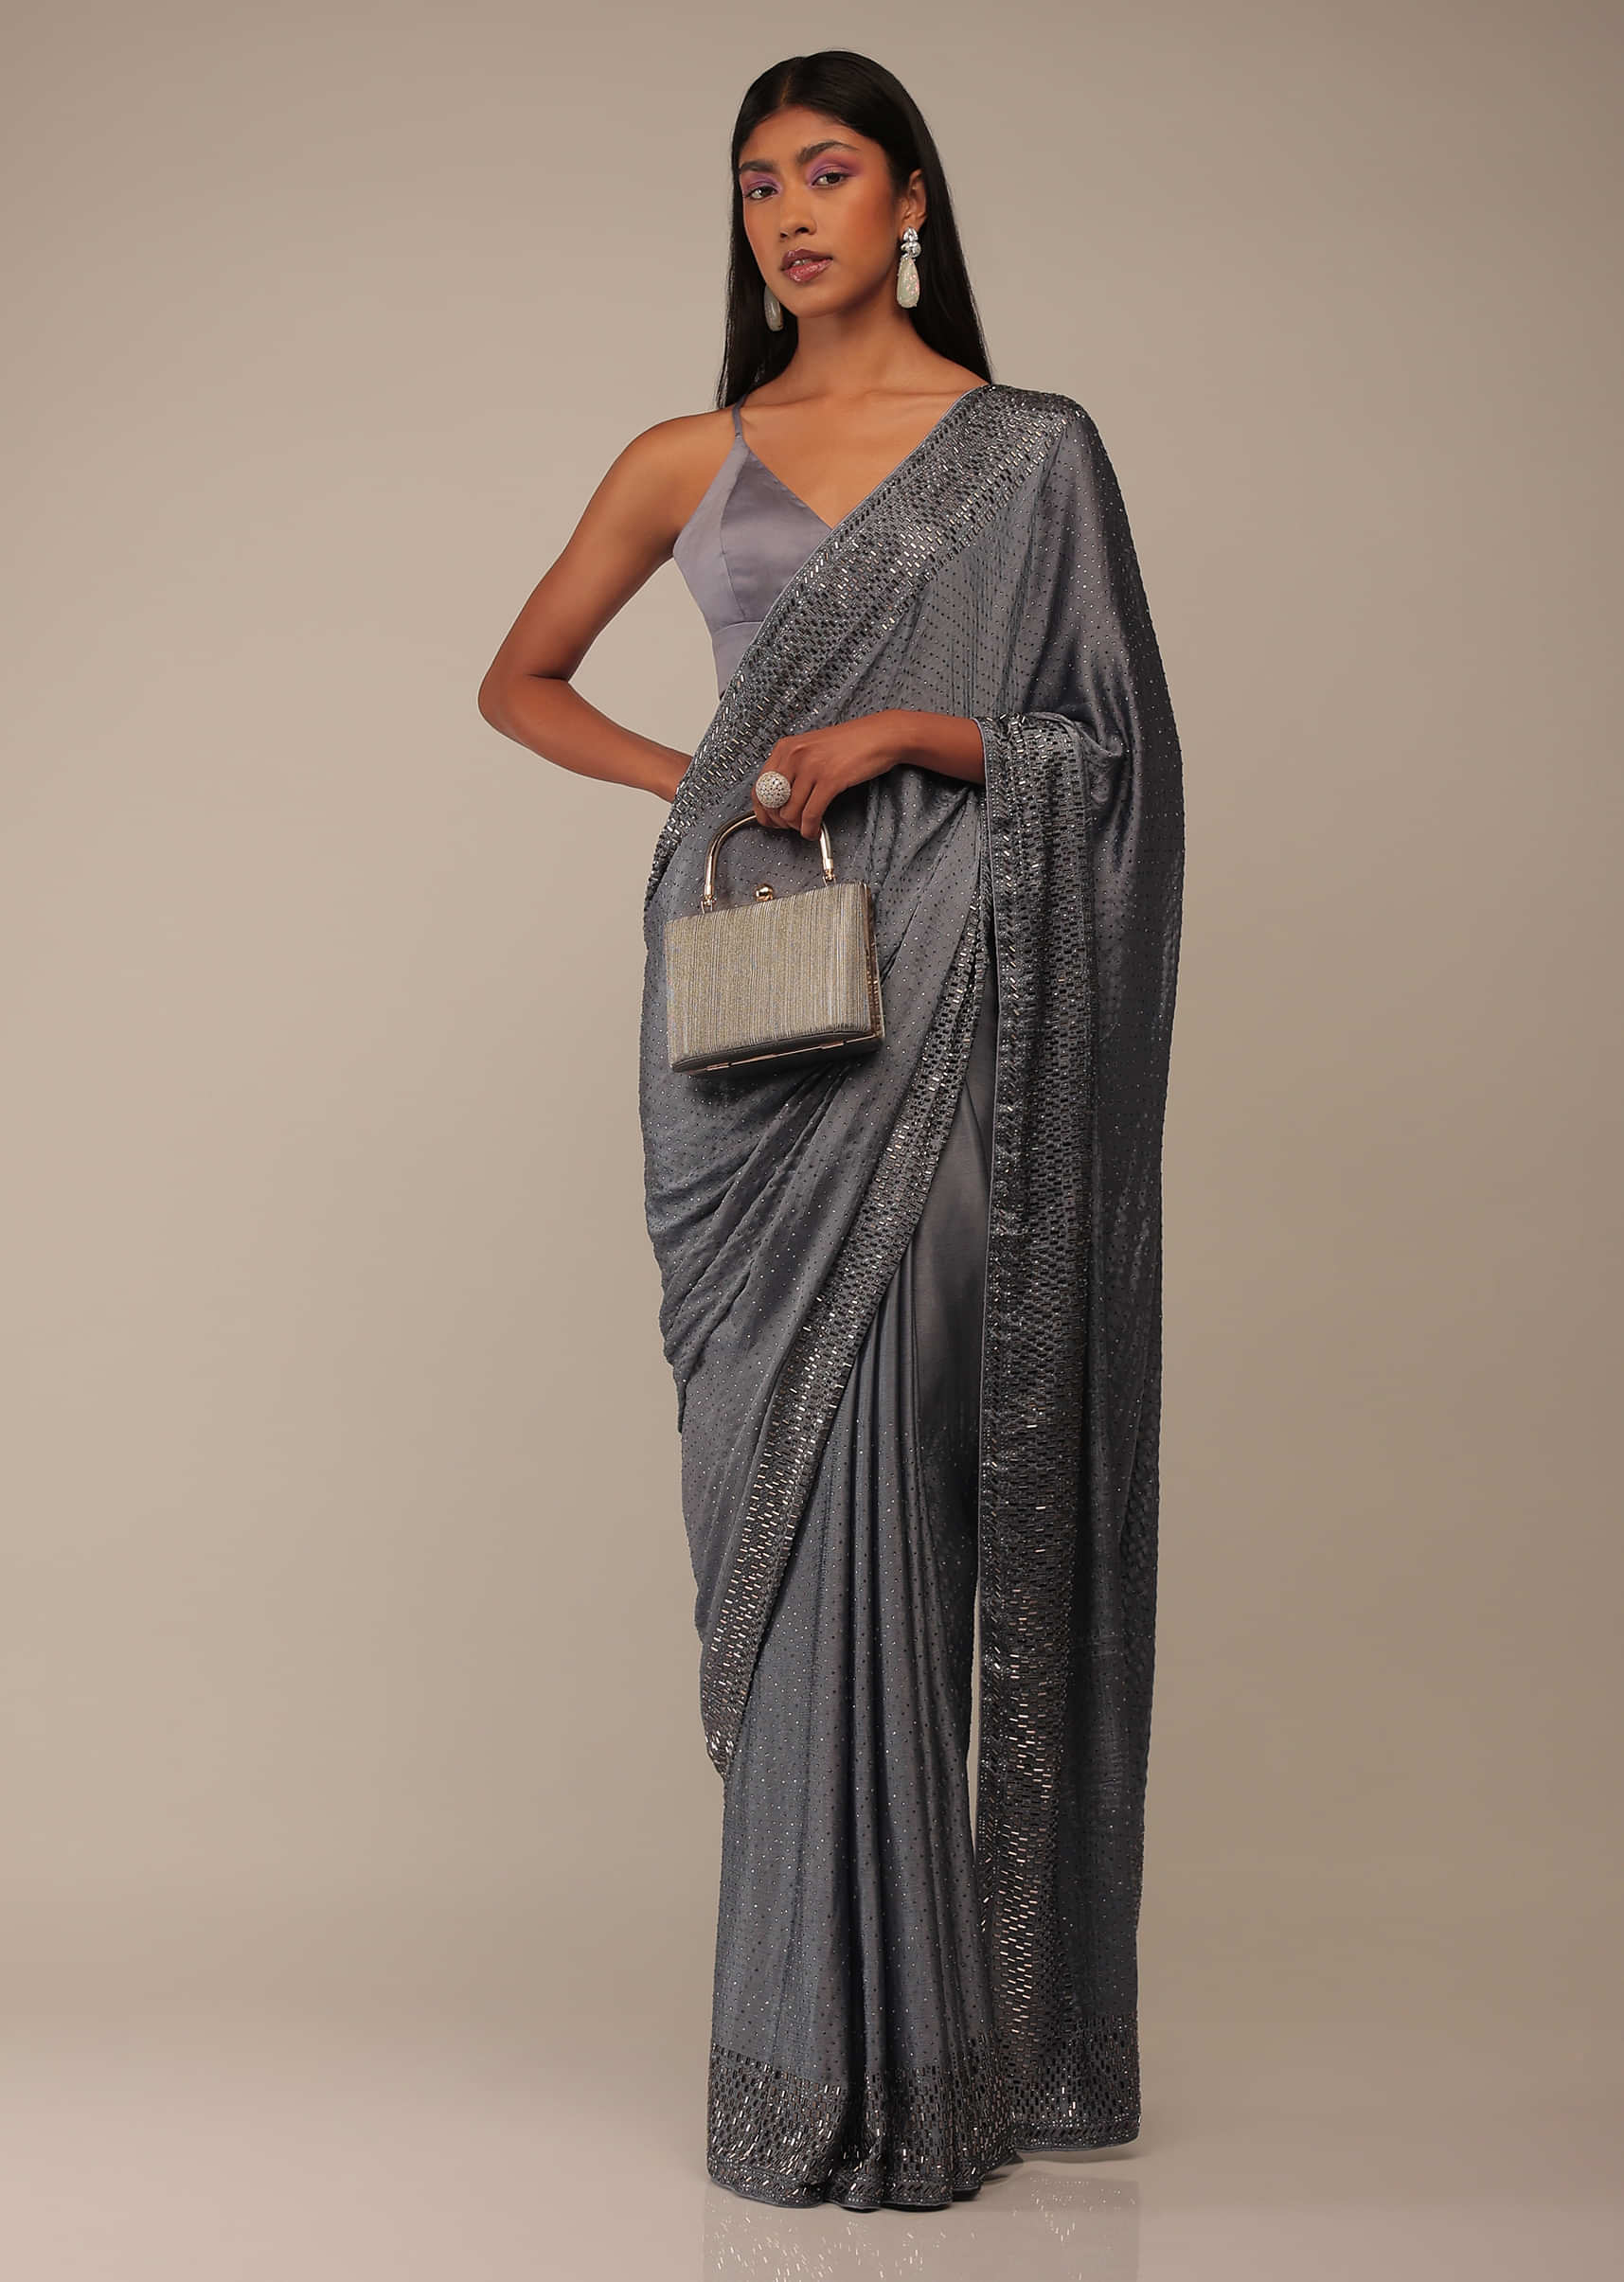 Folkstone Grey Saree With Stones Embellishment, Crafted In Chiffon With Scattered Stones